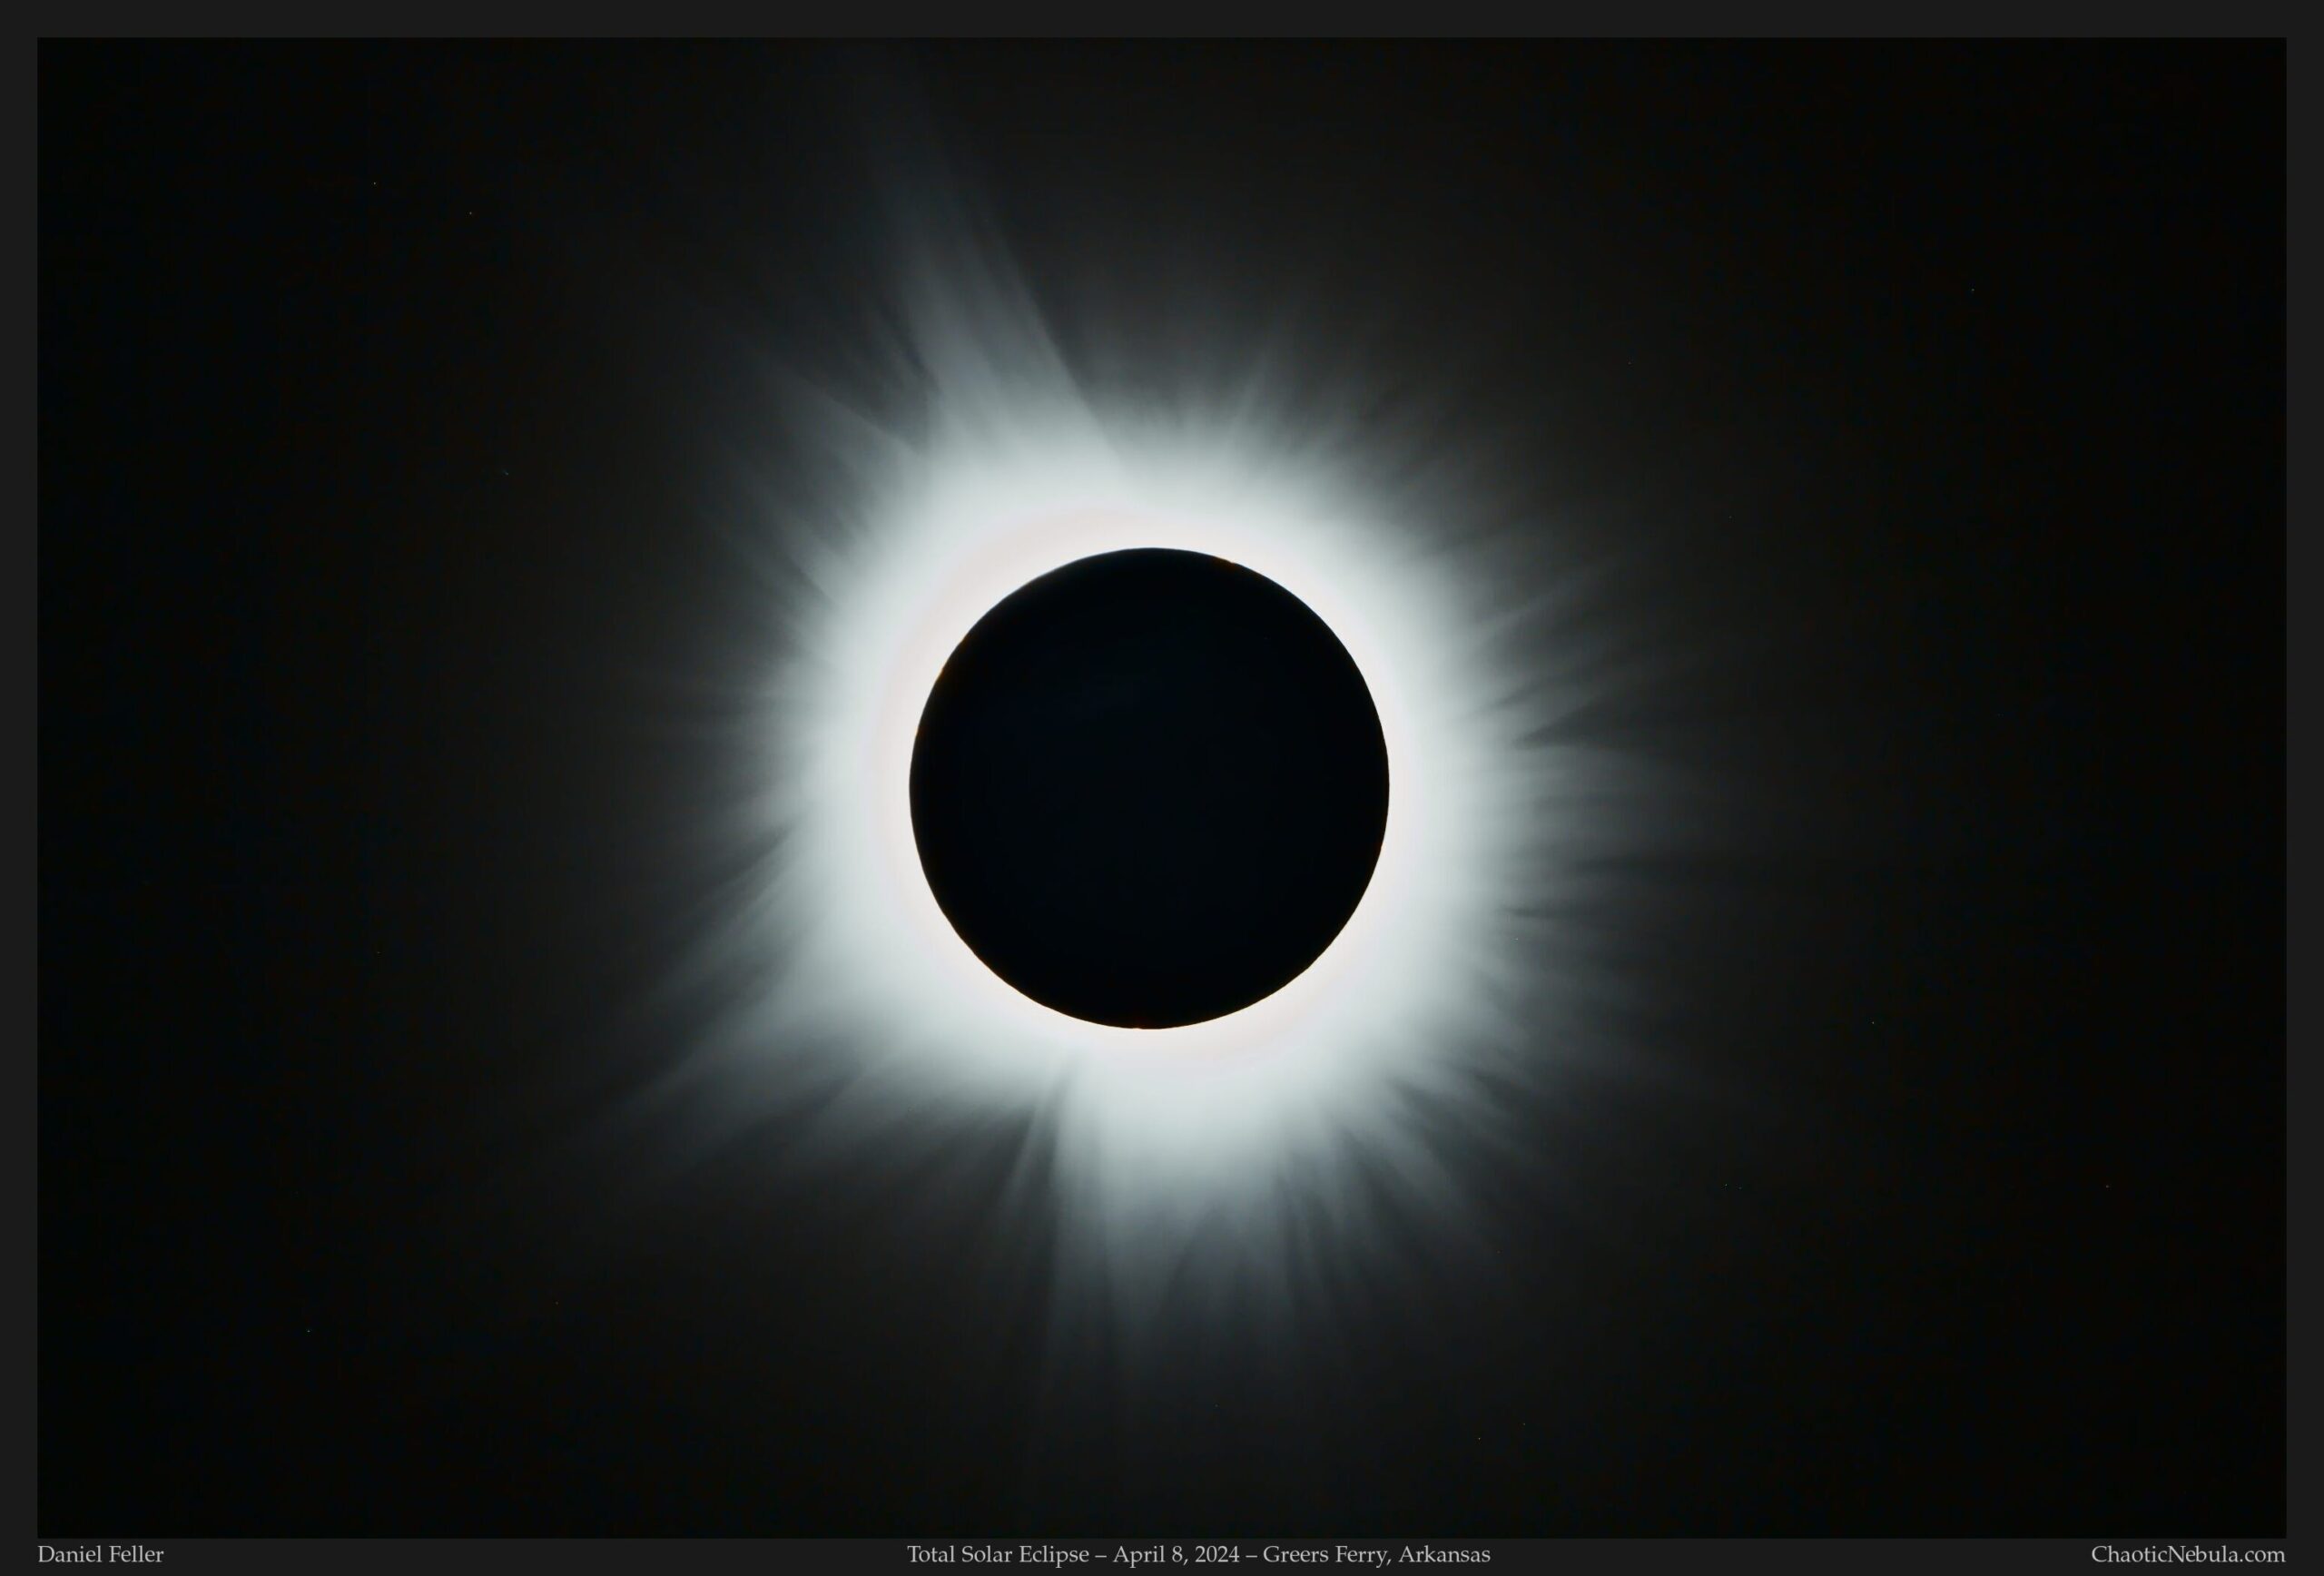 The Amazing Experience of the 2024 Solar Eclipse